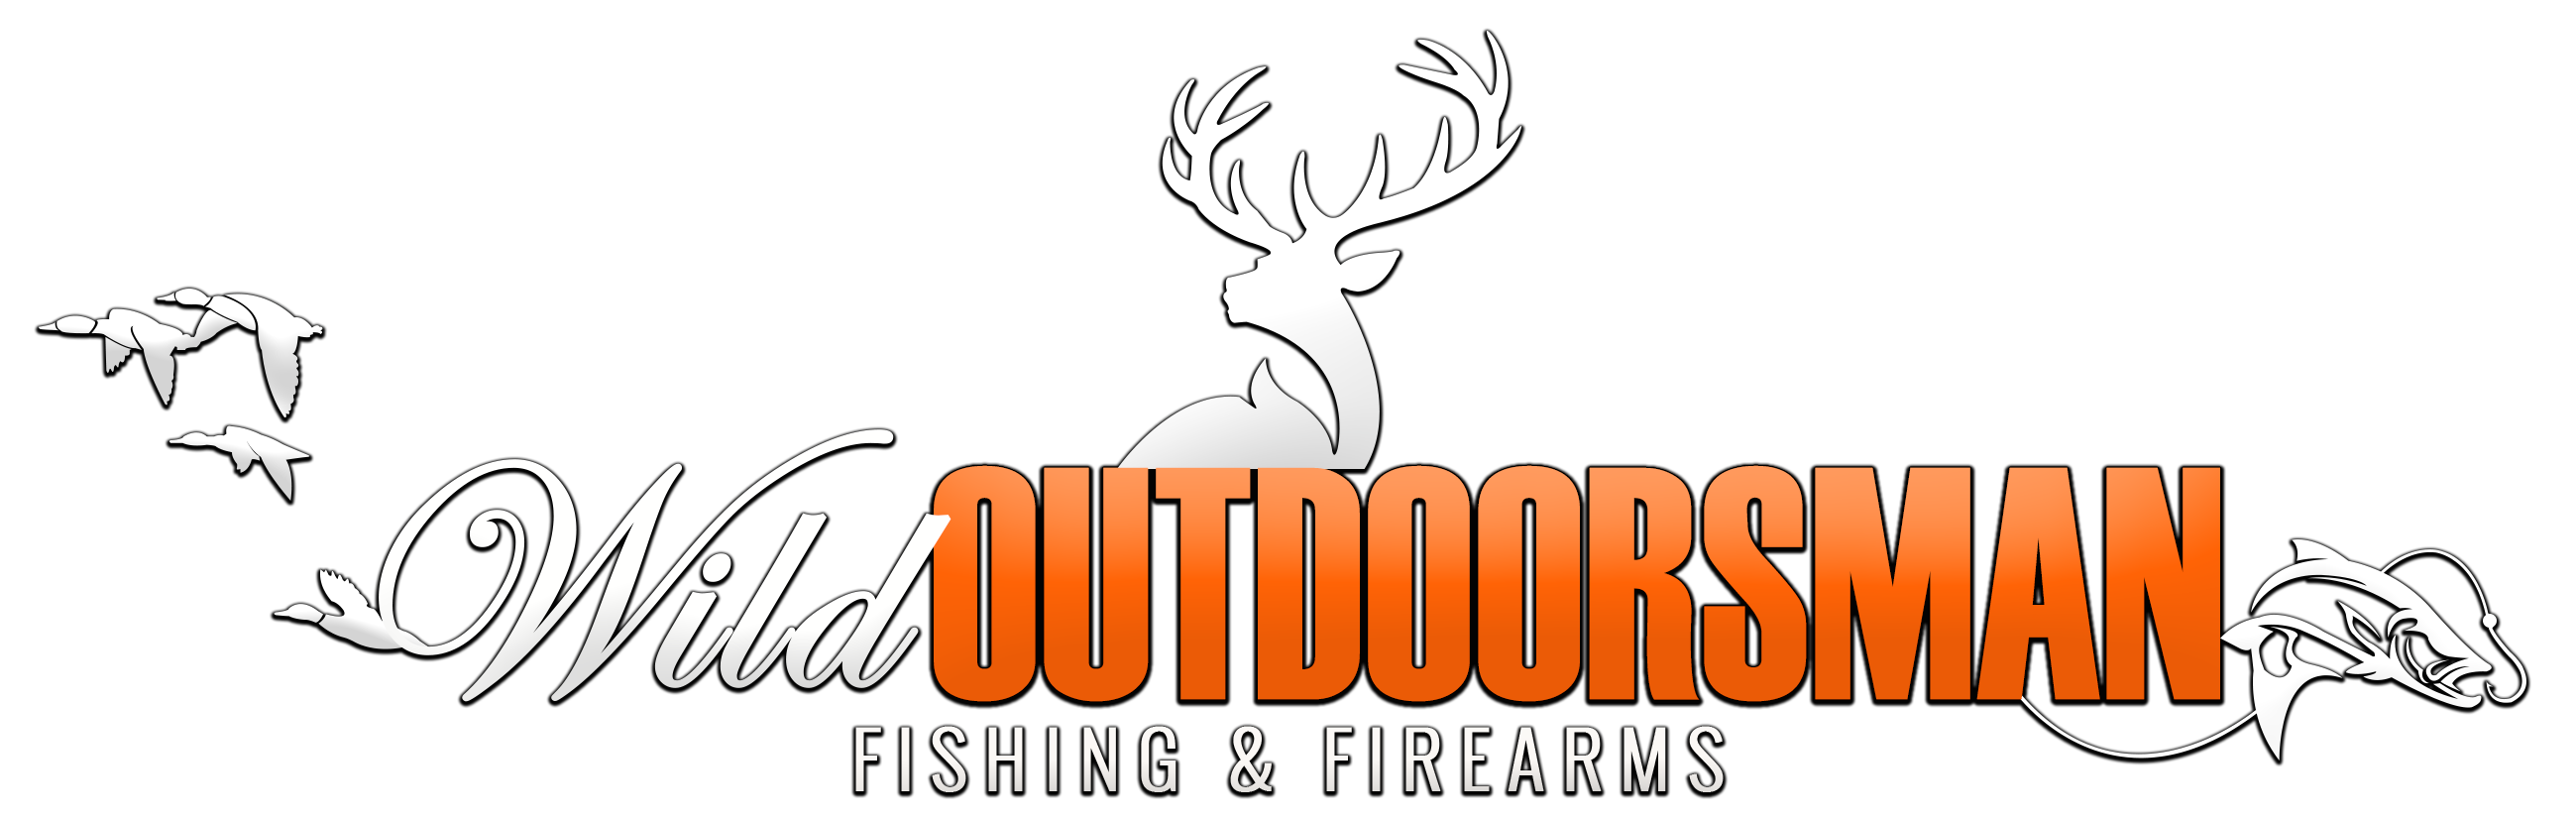 Wild Outdoorsman Fishing & Firearms - The Best Outdoor Shop's In The West